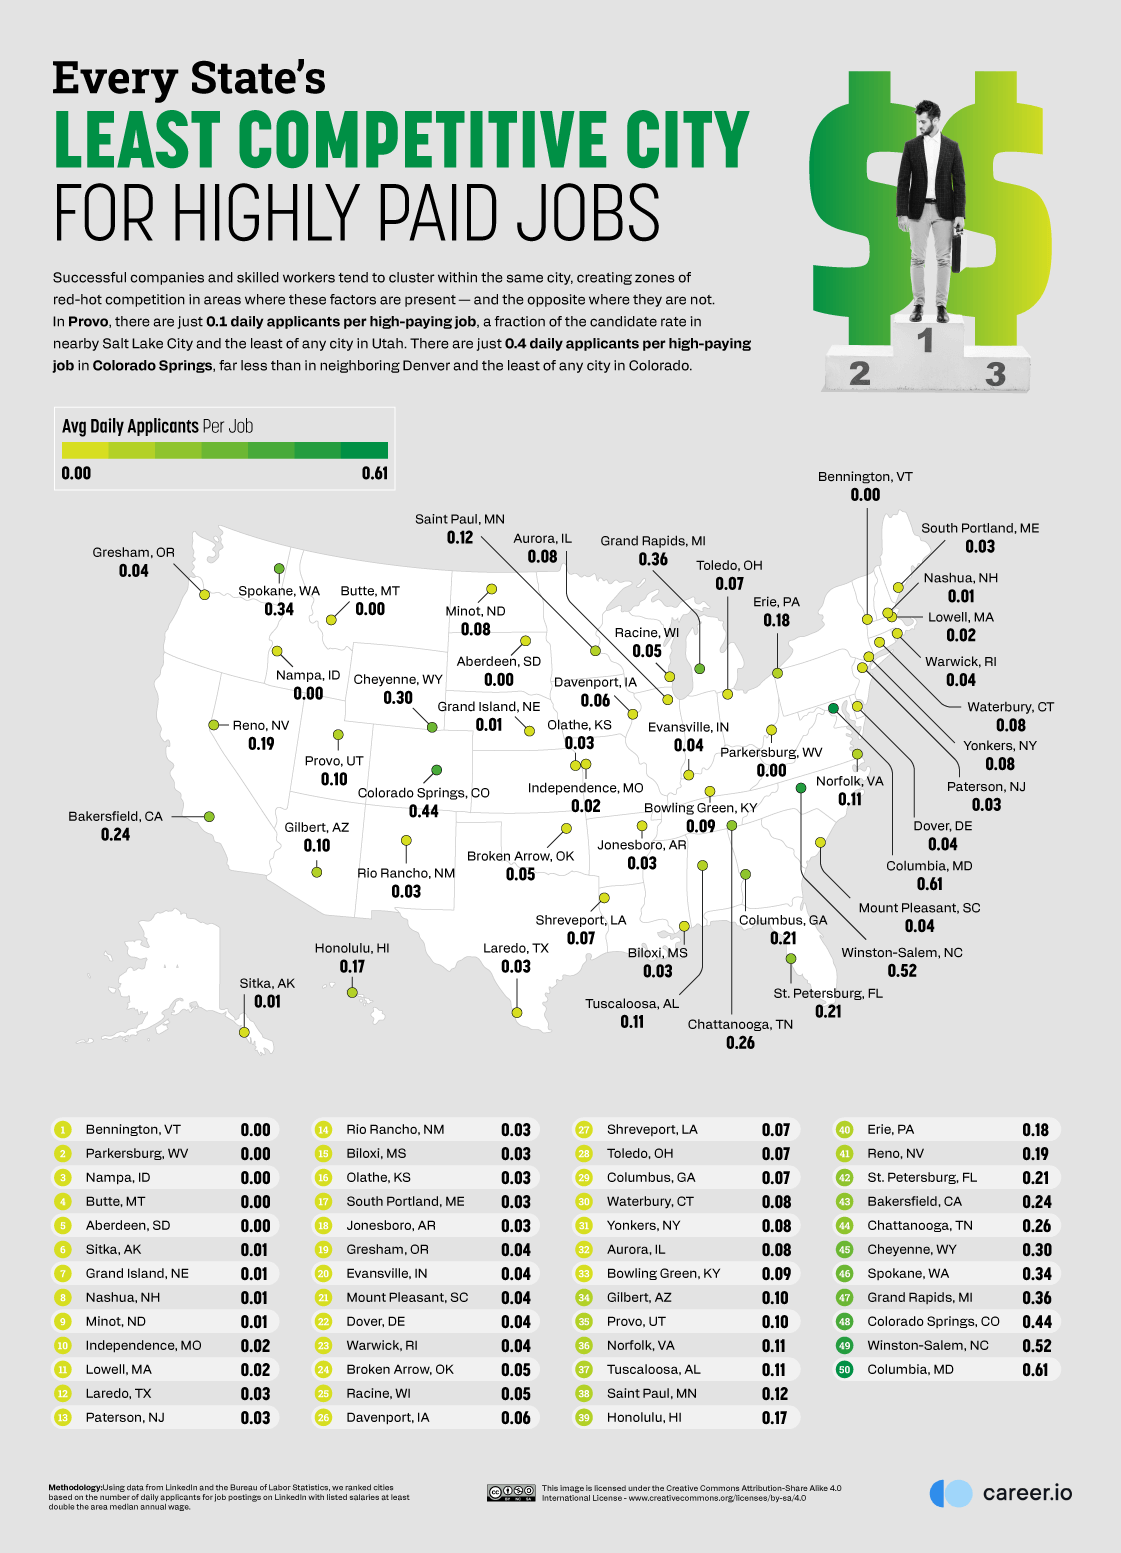 04_Every-States-Least-Competitive-City-for-Highly-Paid-Jobs.png